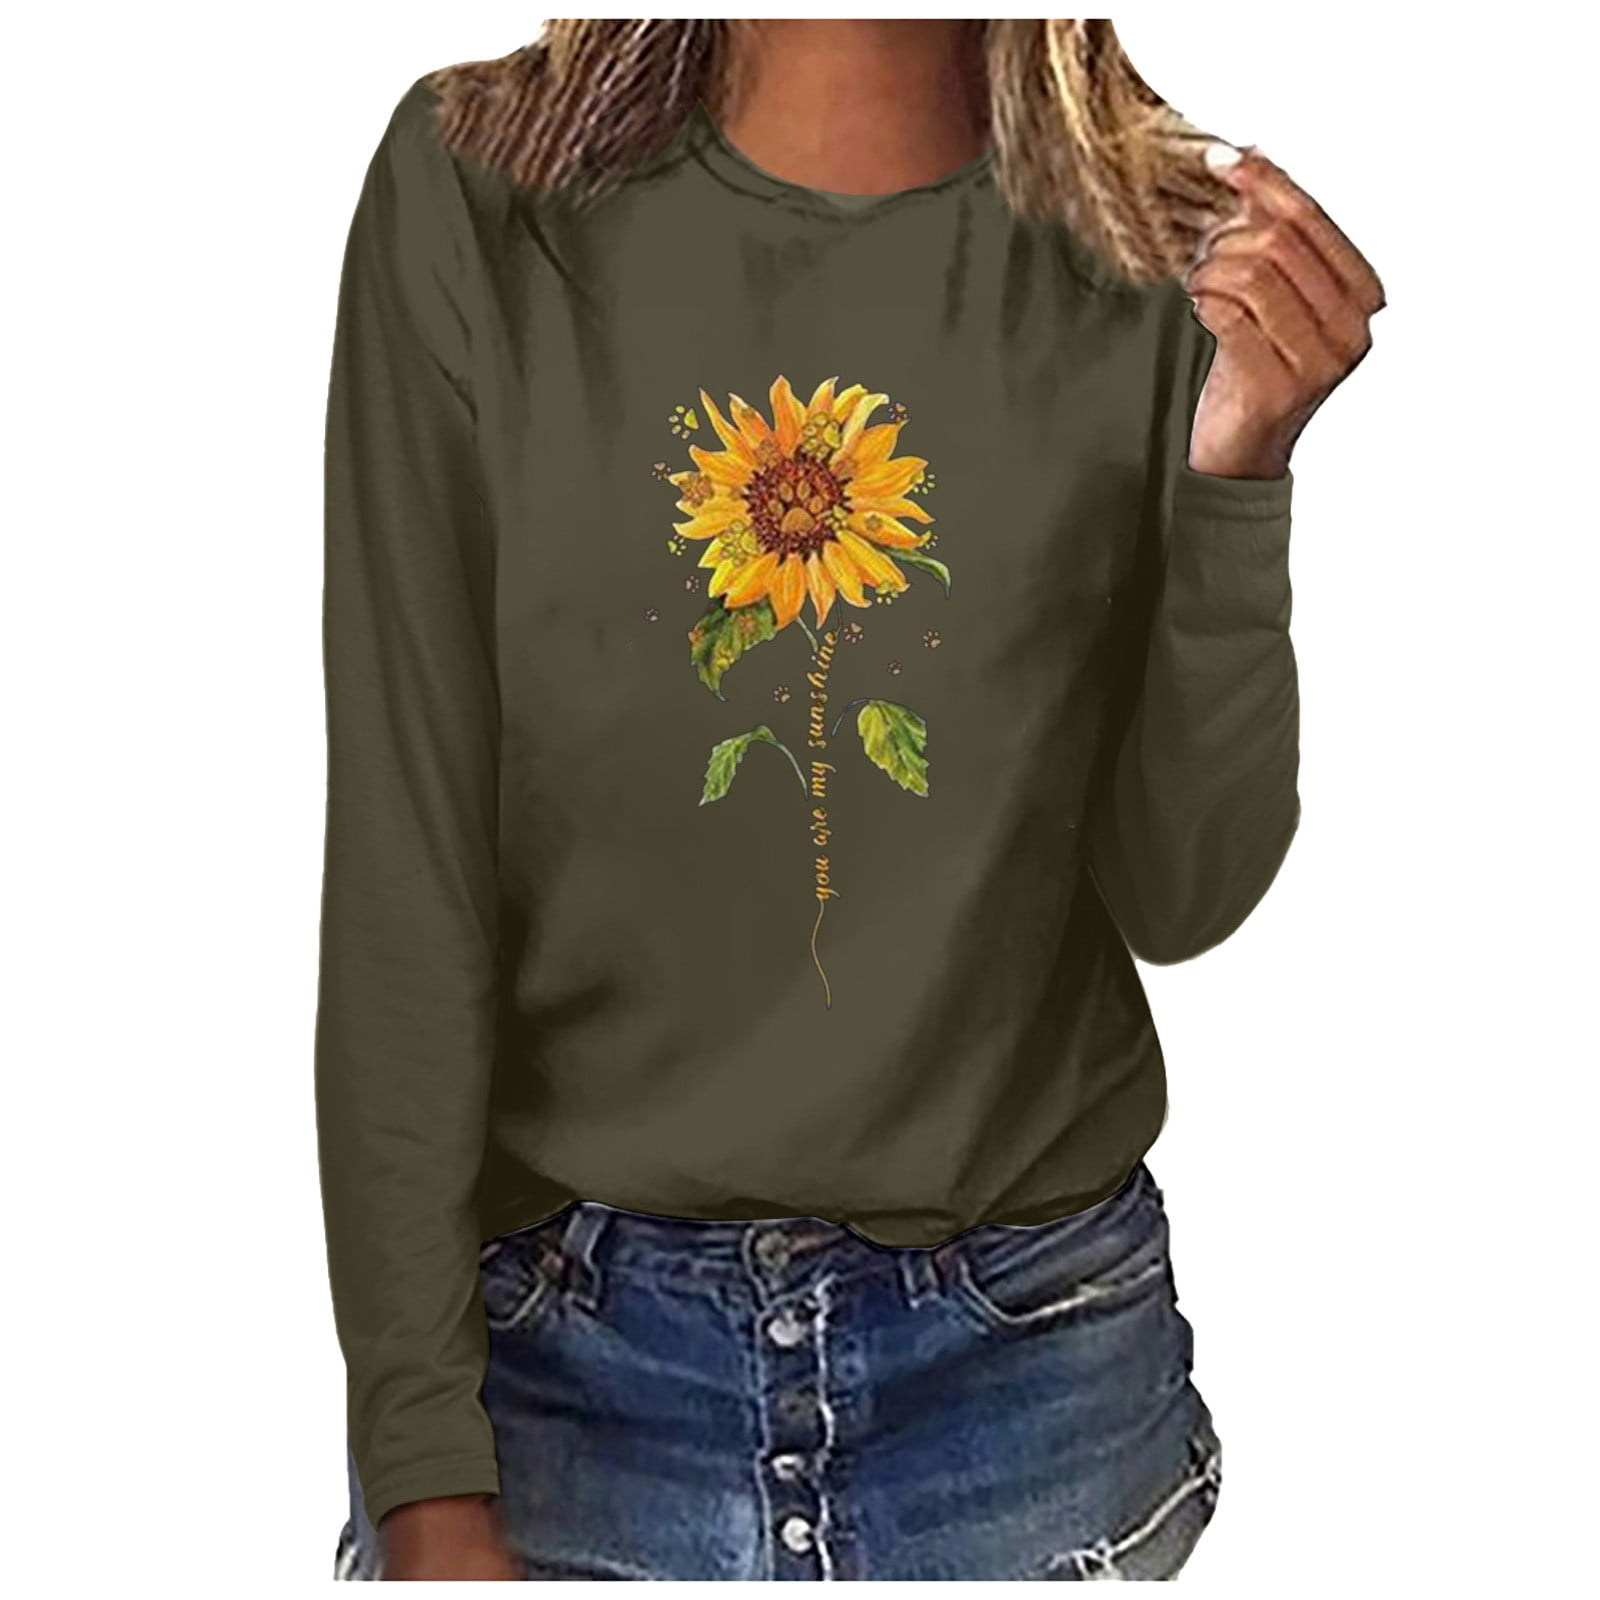 DZQUY Womens Long Sleeve Sunflower Print T Shirt Cute Funny Graphic Sweatshirts Loose Casual Cotton Pullovers Tops 